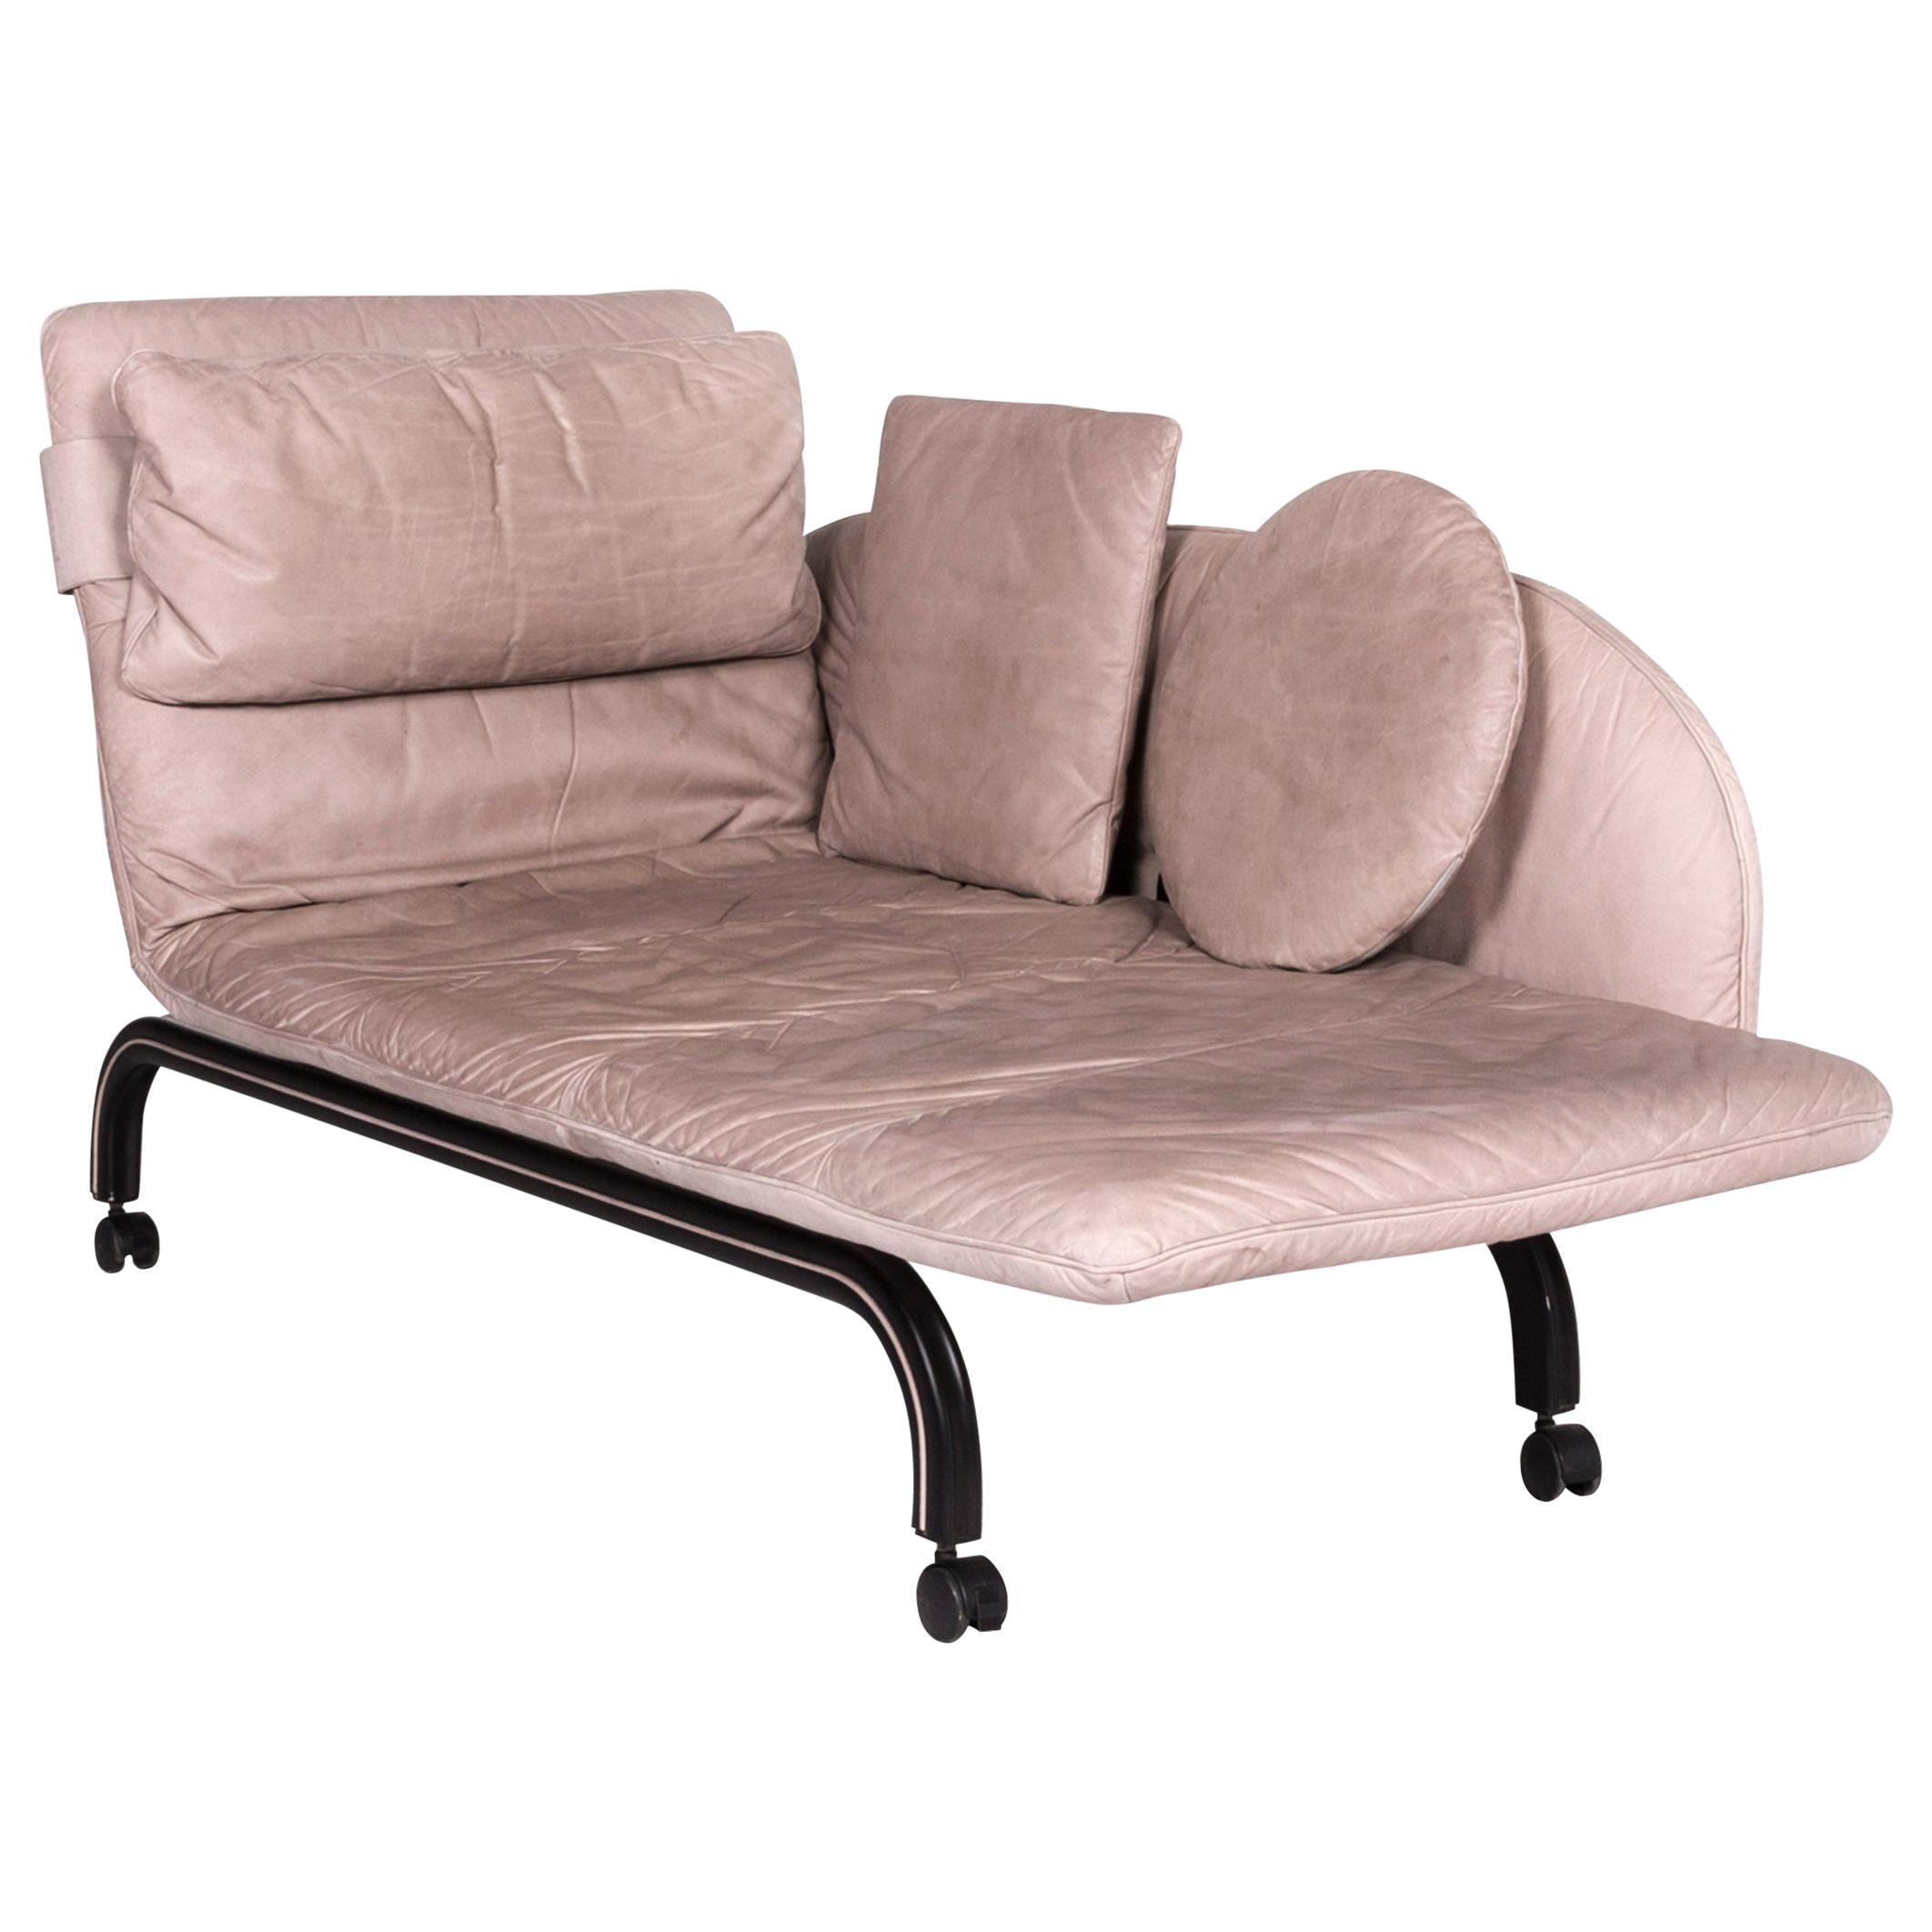 Interprofil Beo Anilin Leather Lounger Gray Relax Function im Angebot